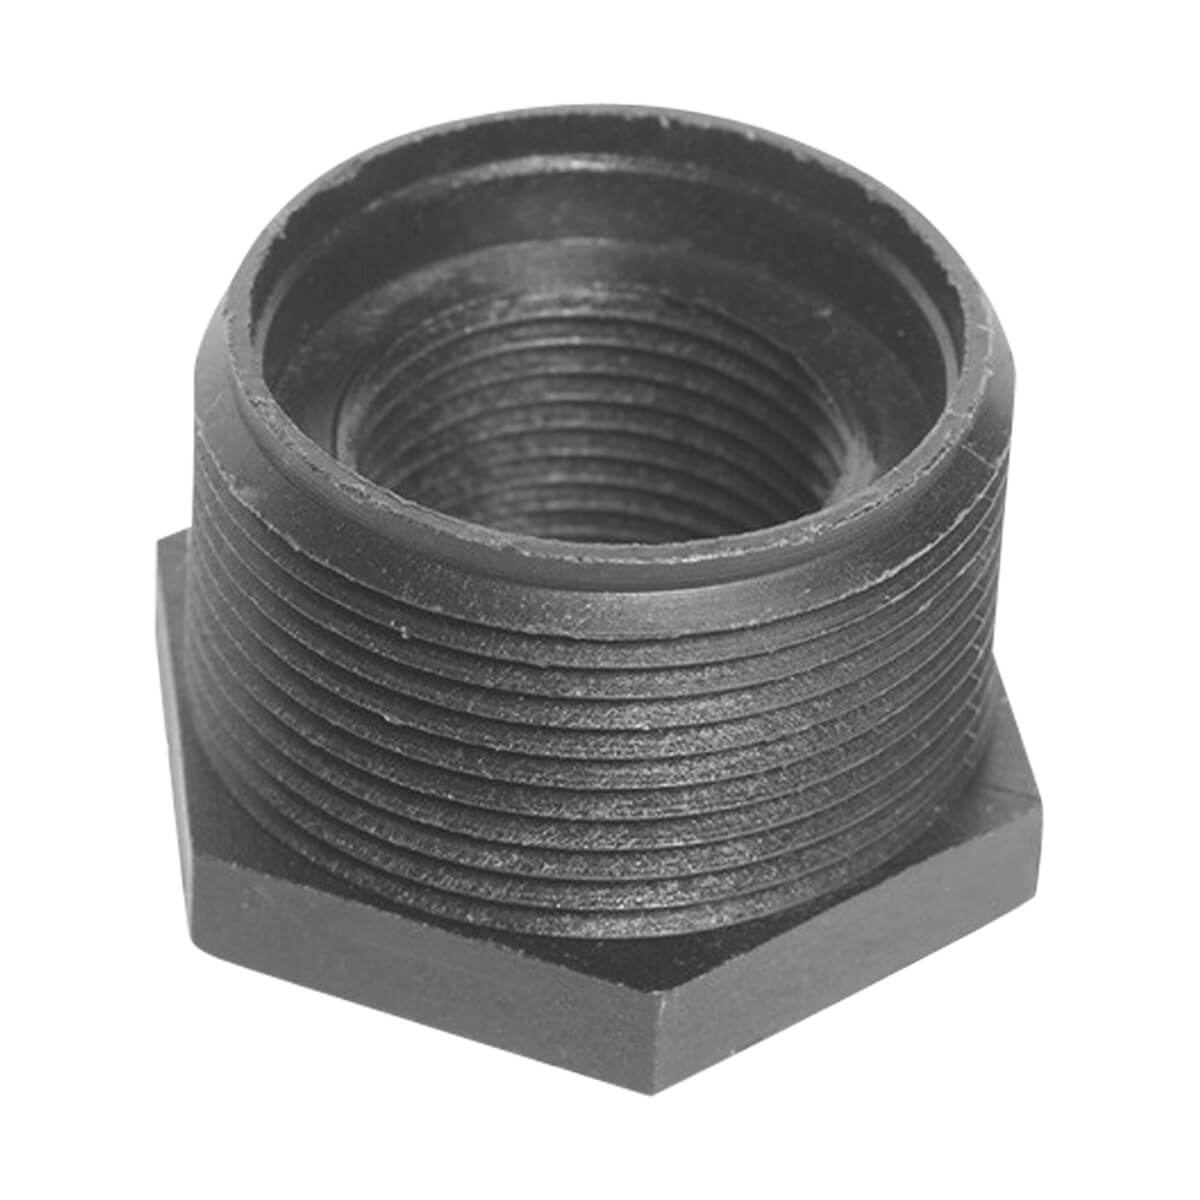 Reducer Bushings MPT x FPT - 3-in x 2-in